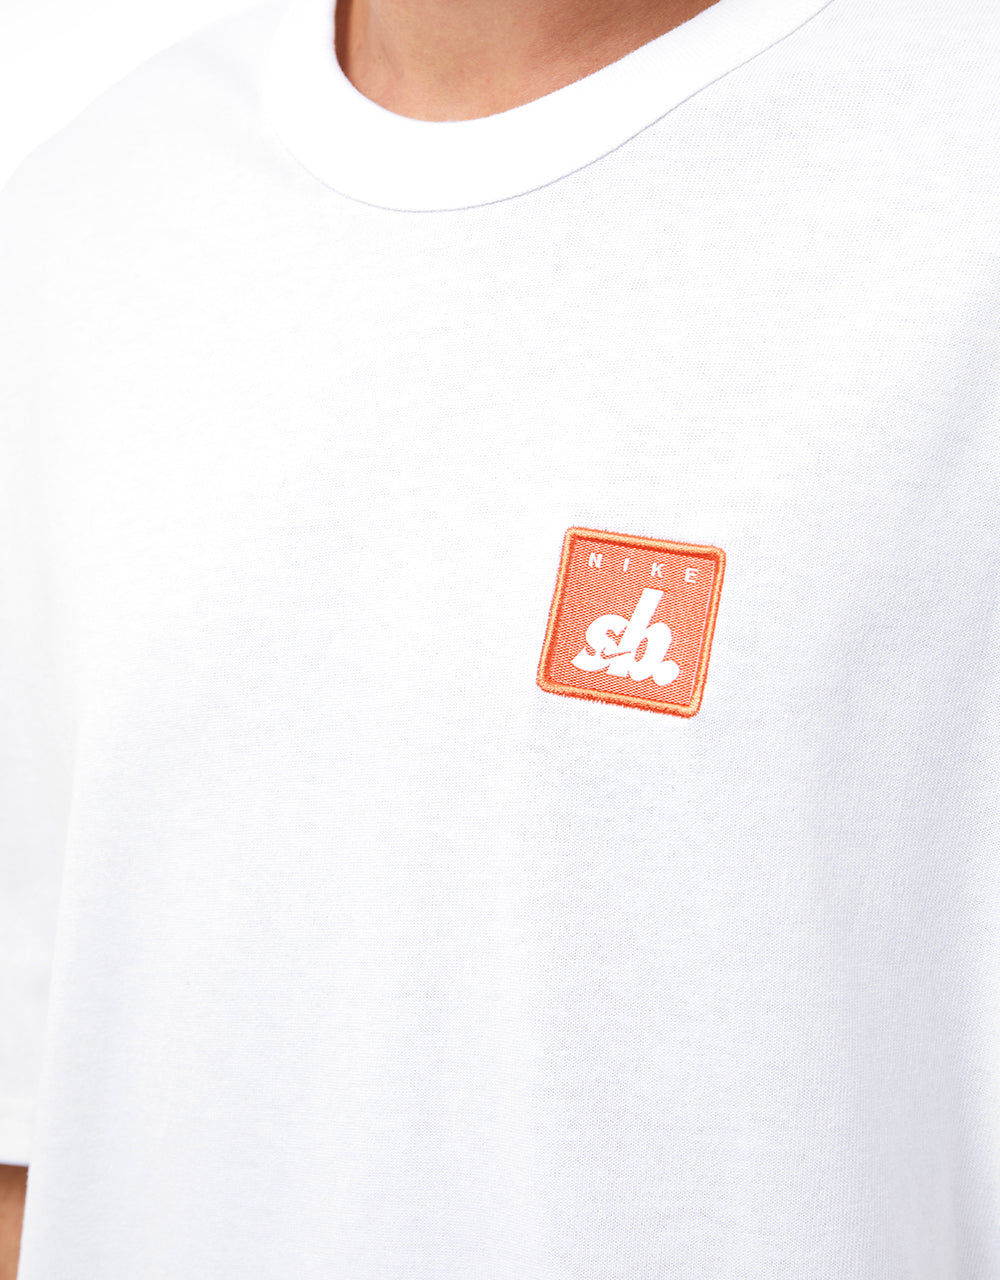 Nike SB Embroidered Patch T-Shirt - White